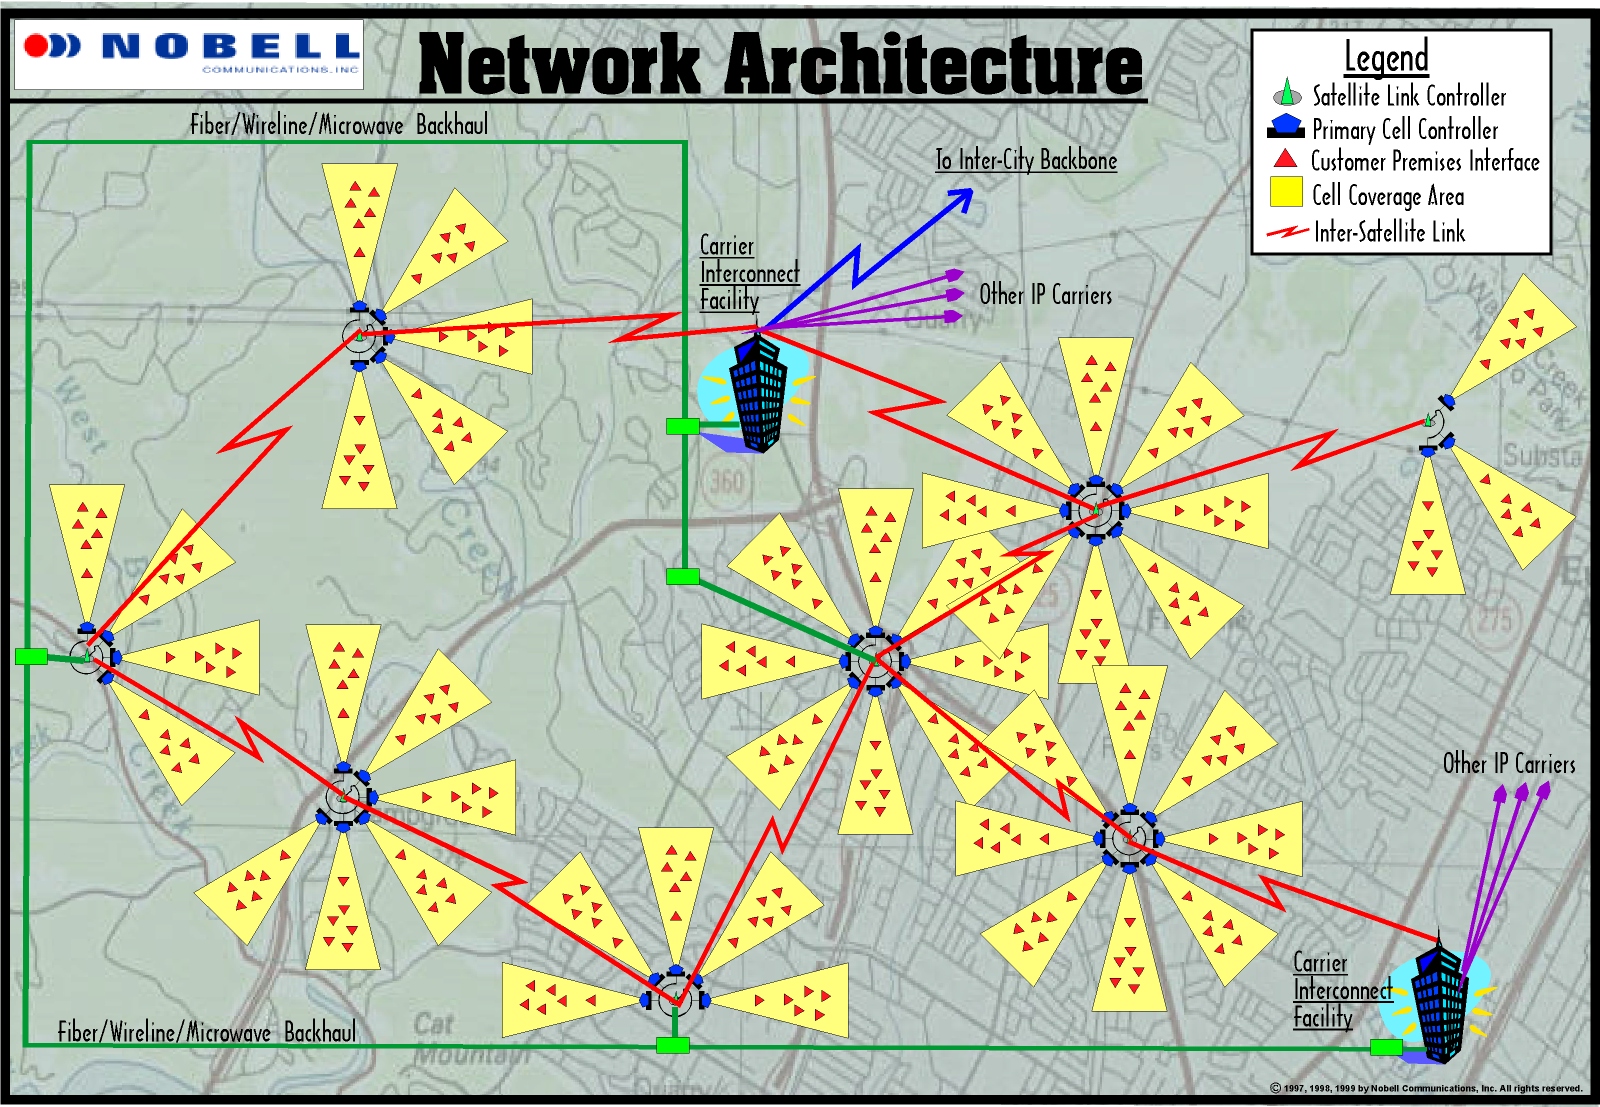 Nobell Network Architecture